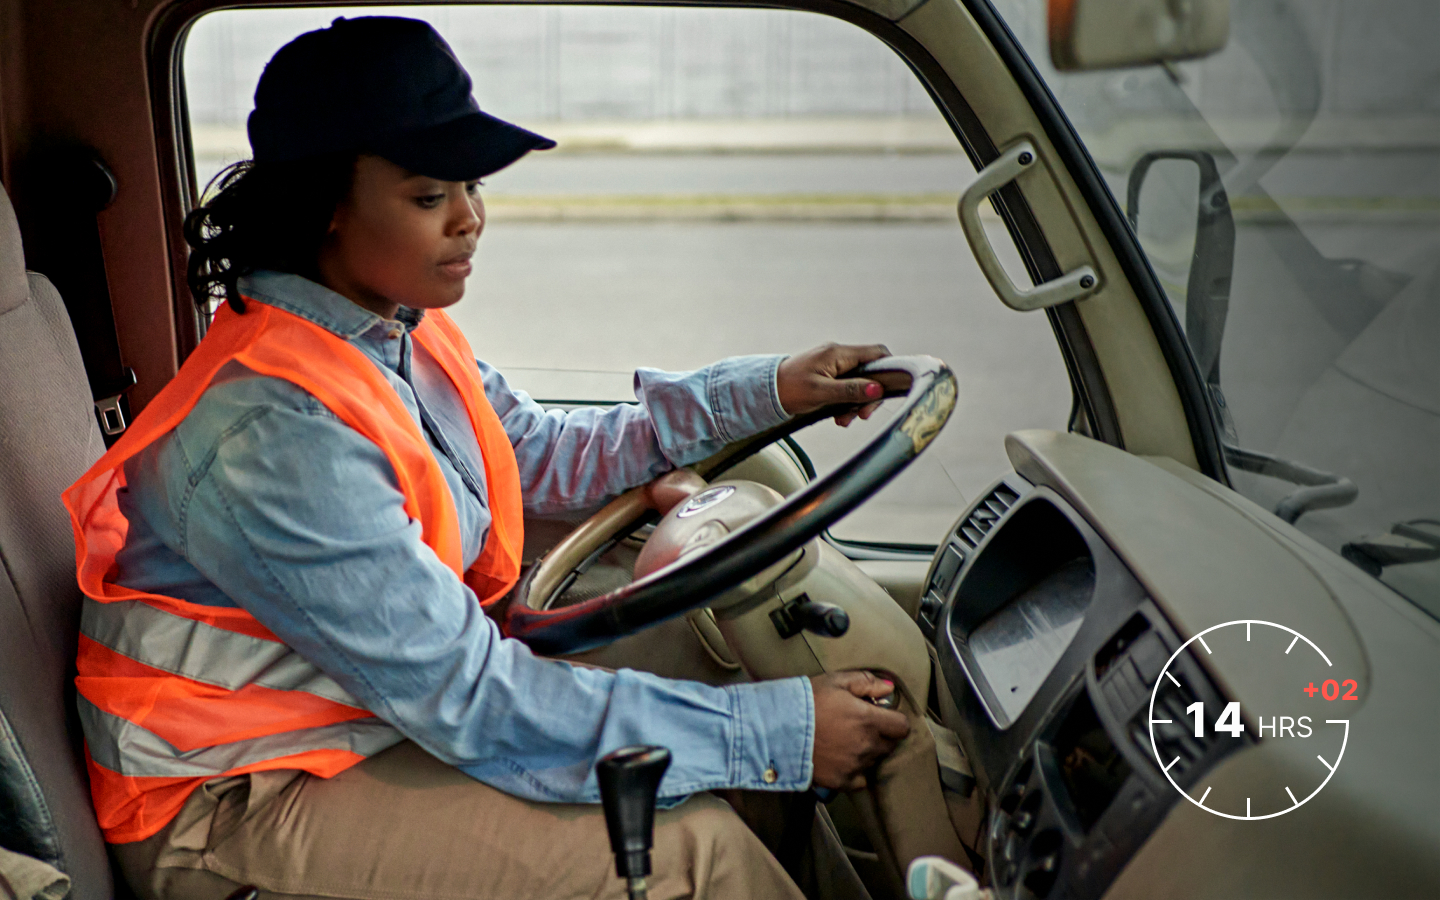 2020 Hours of Service Rules, DOT Compliance Services